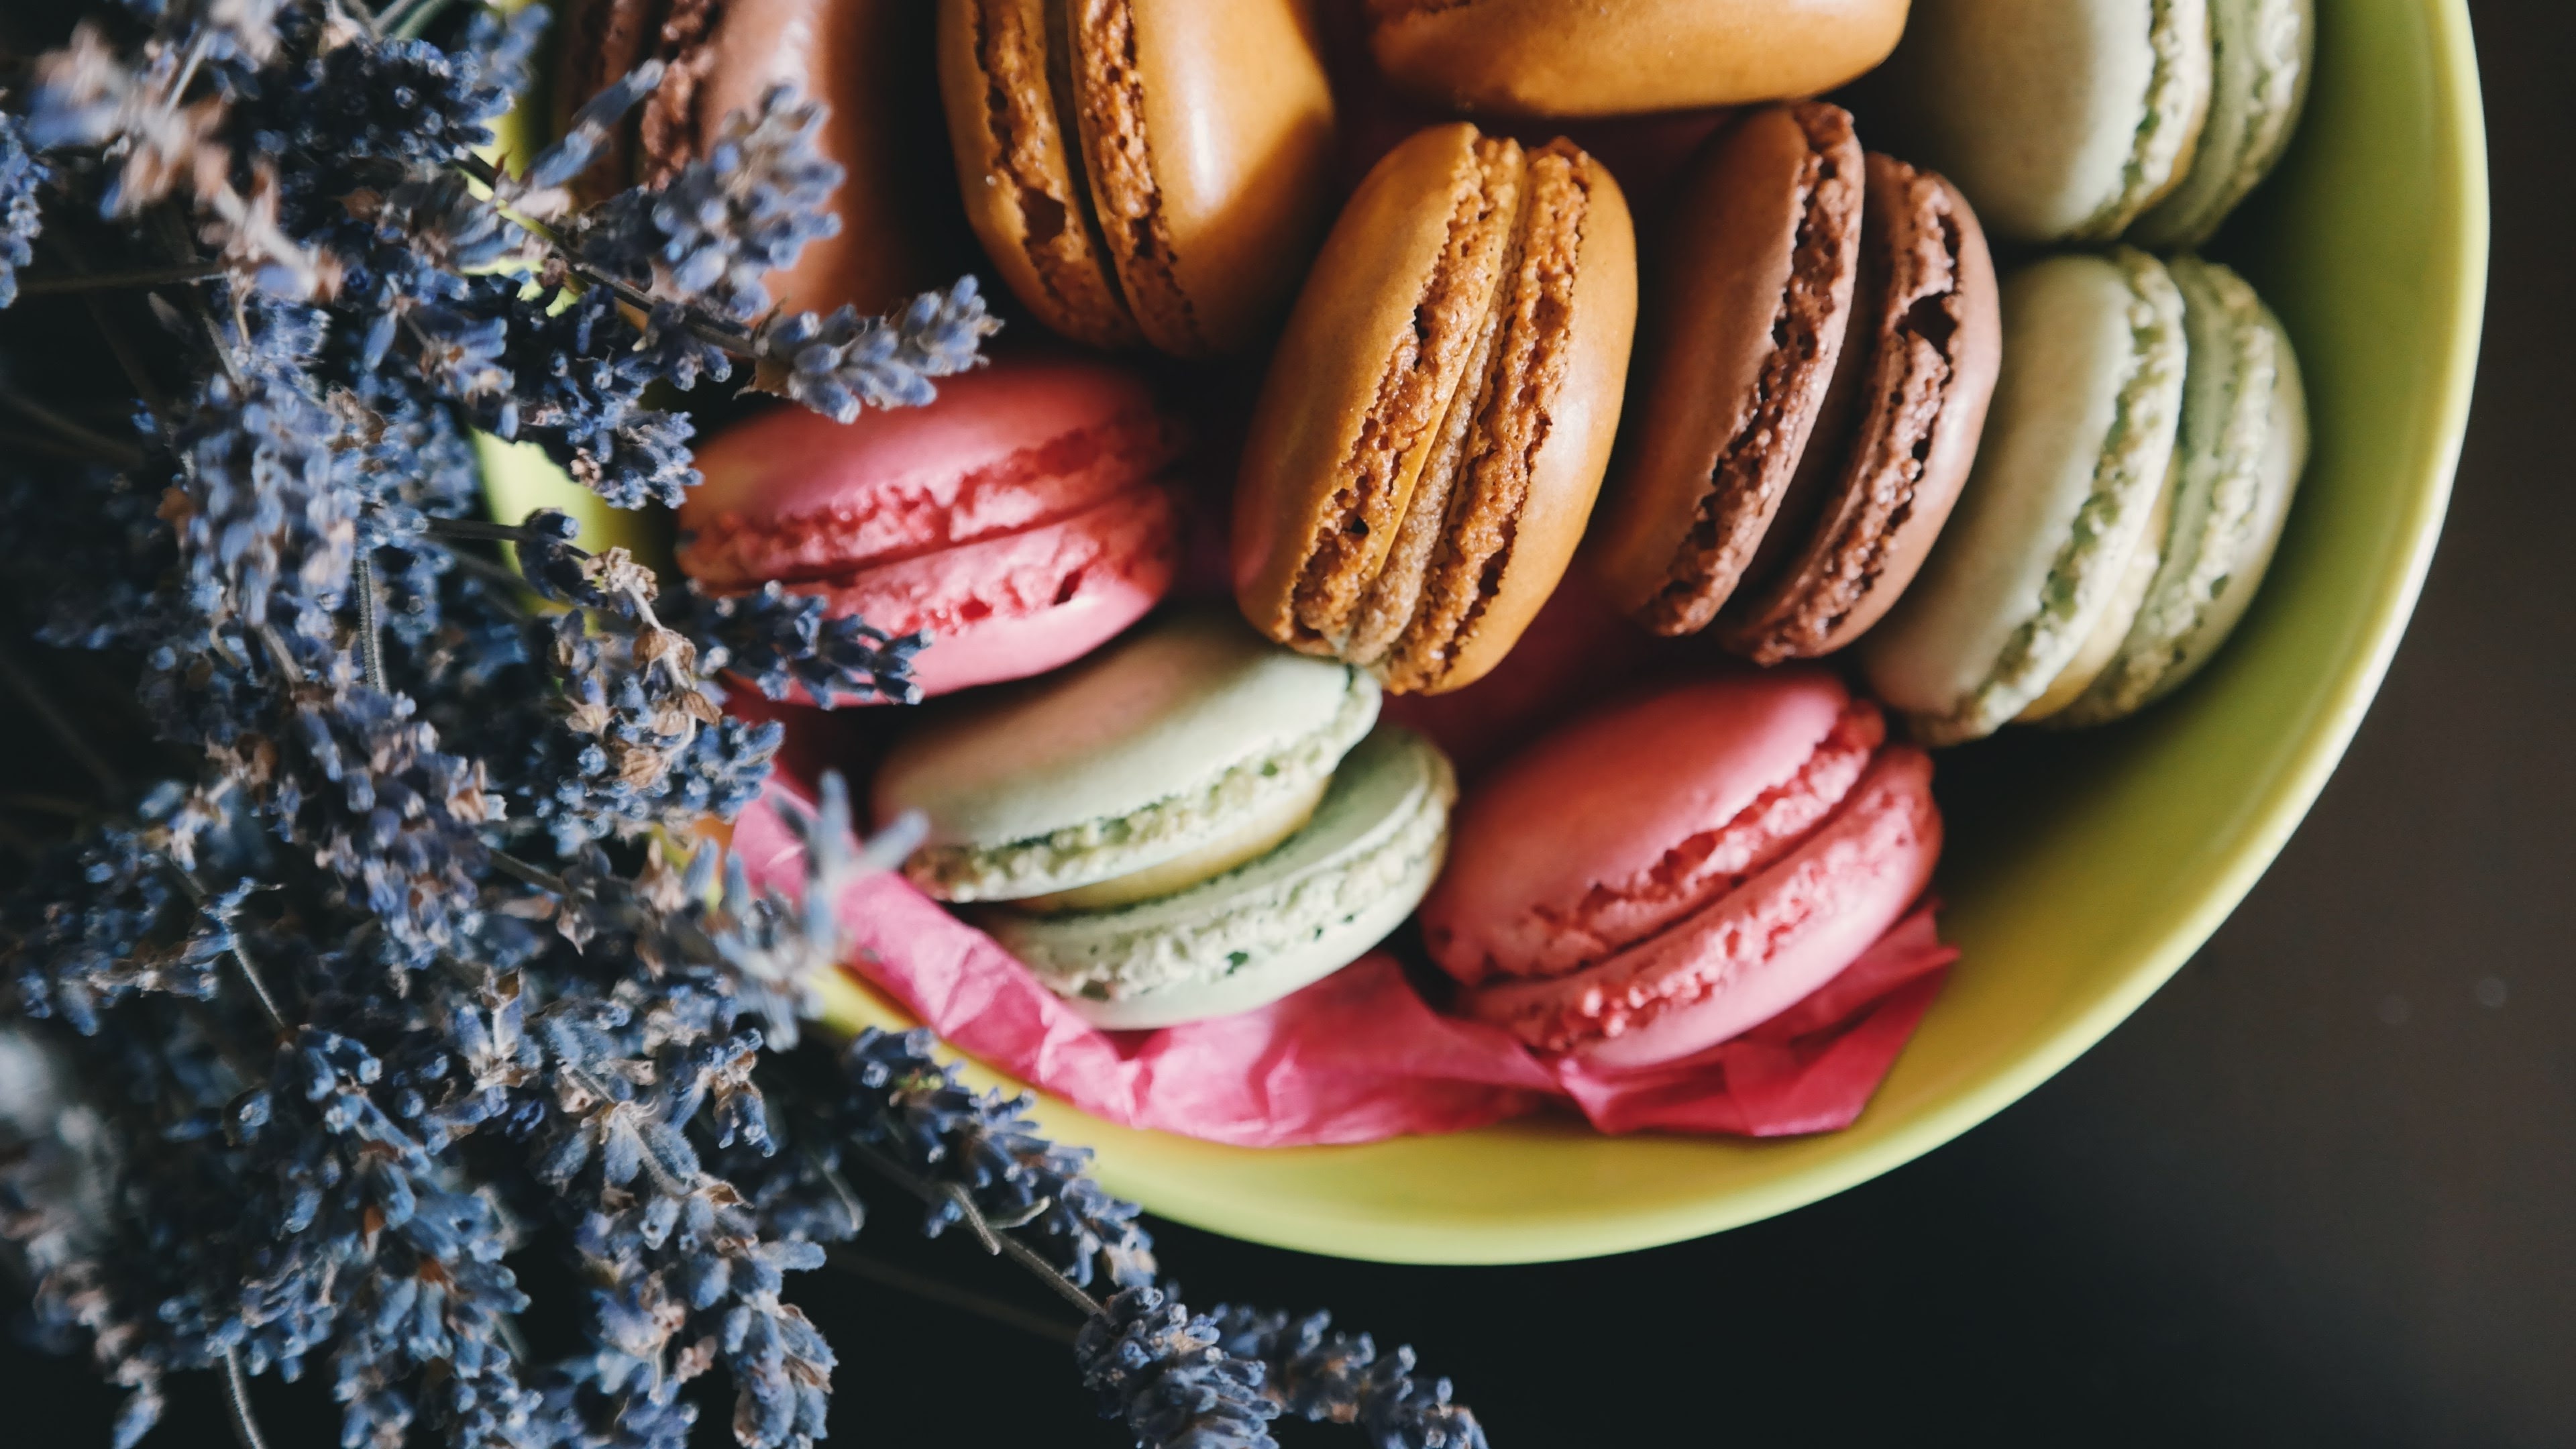 Macaron: Introduced in France by the Italian chef of queen Catherine de Medici. 3840x2160 4K Wallpaper.